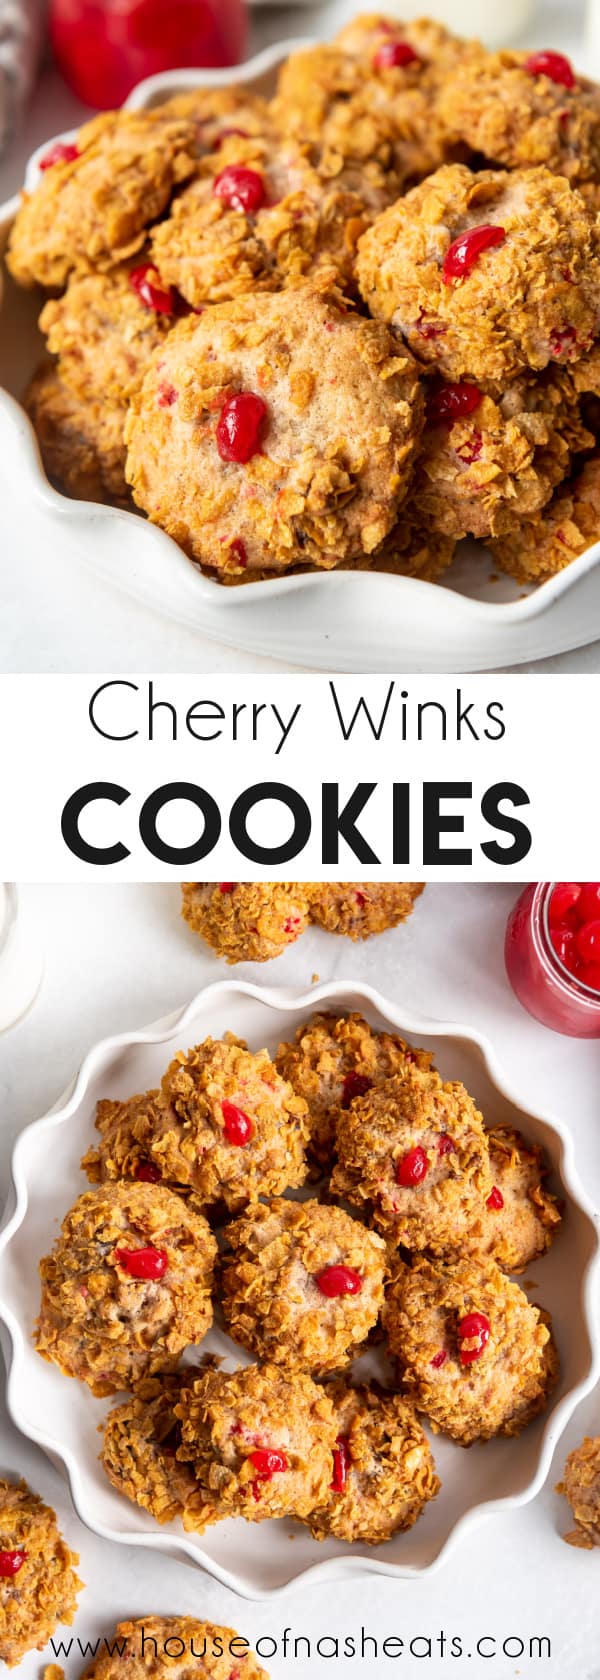 A collage of images of cherry winks cookies with text overlay.